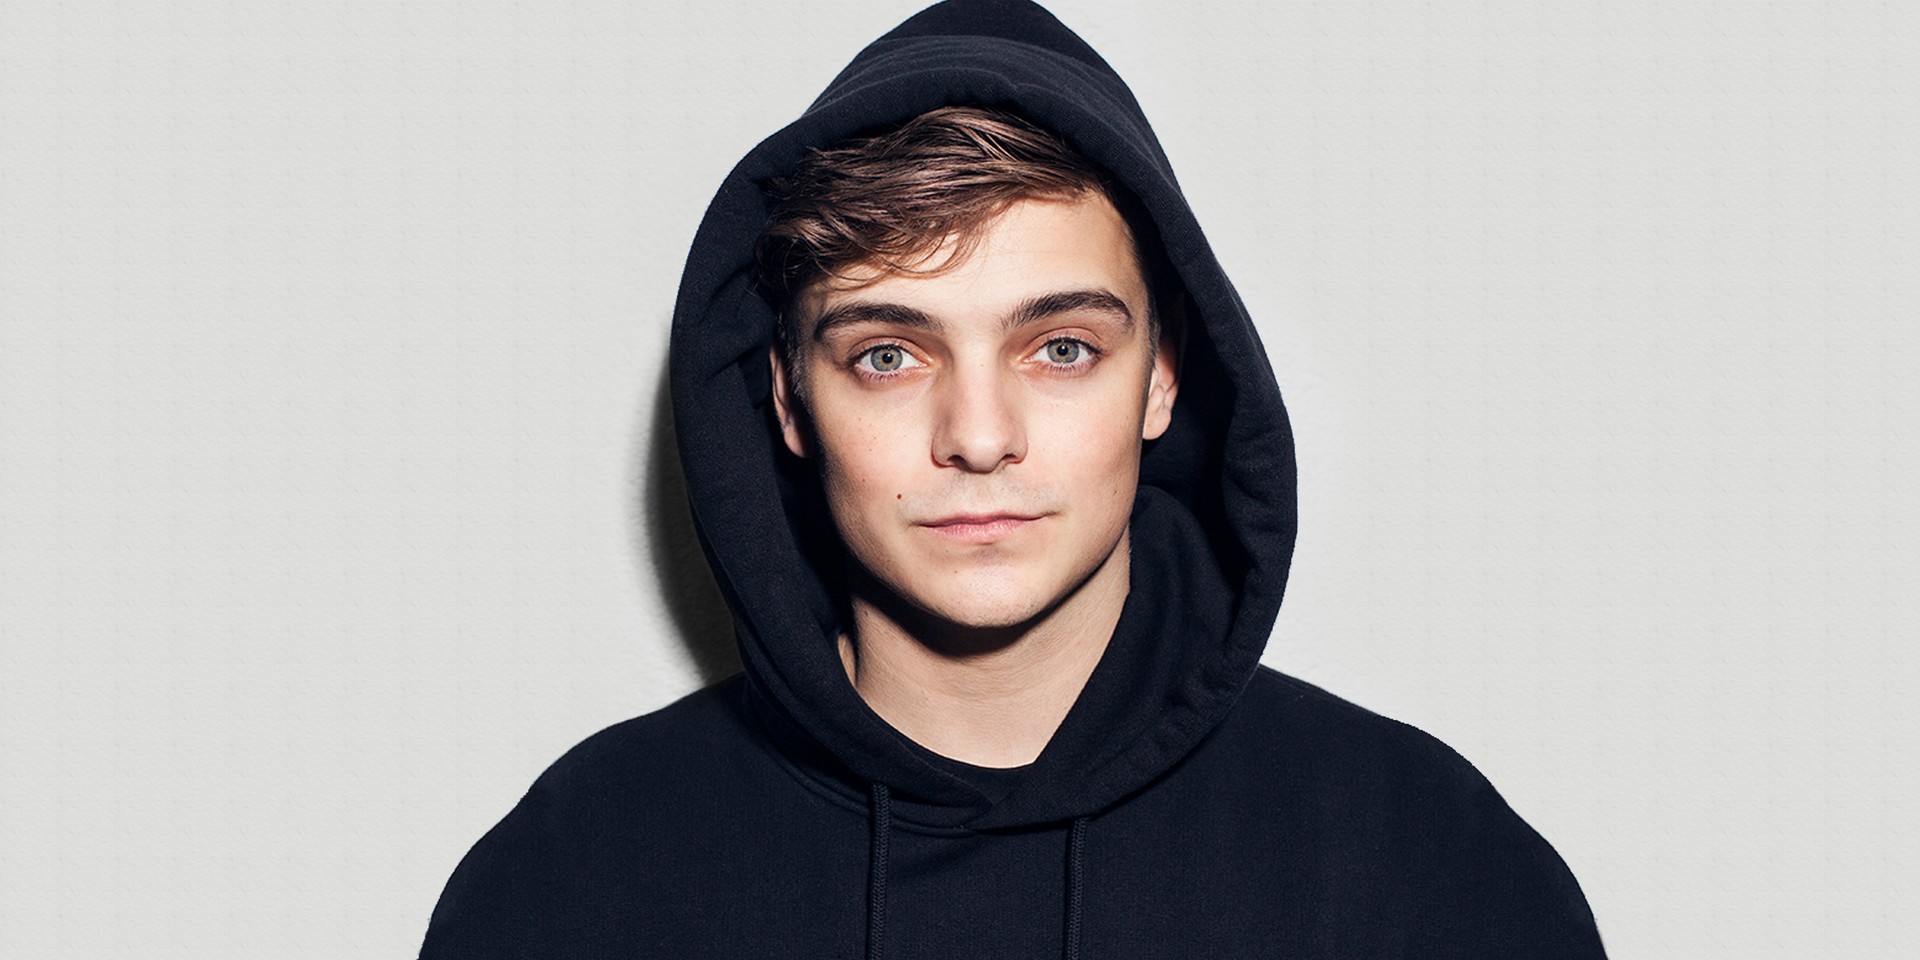 Martin Garrix to perform in Singapore at inaugural Hydeout Festival 